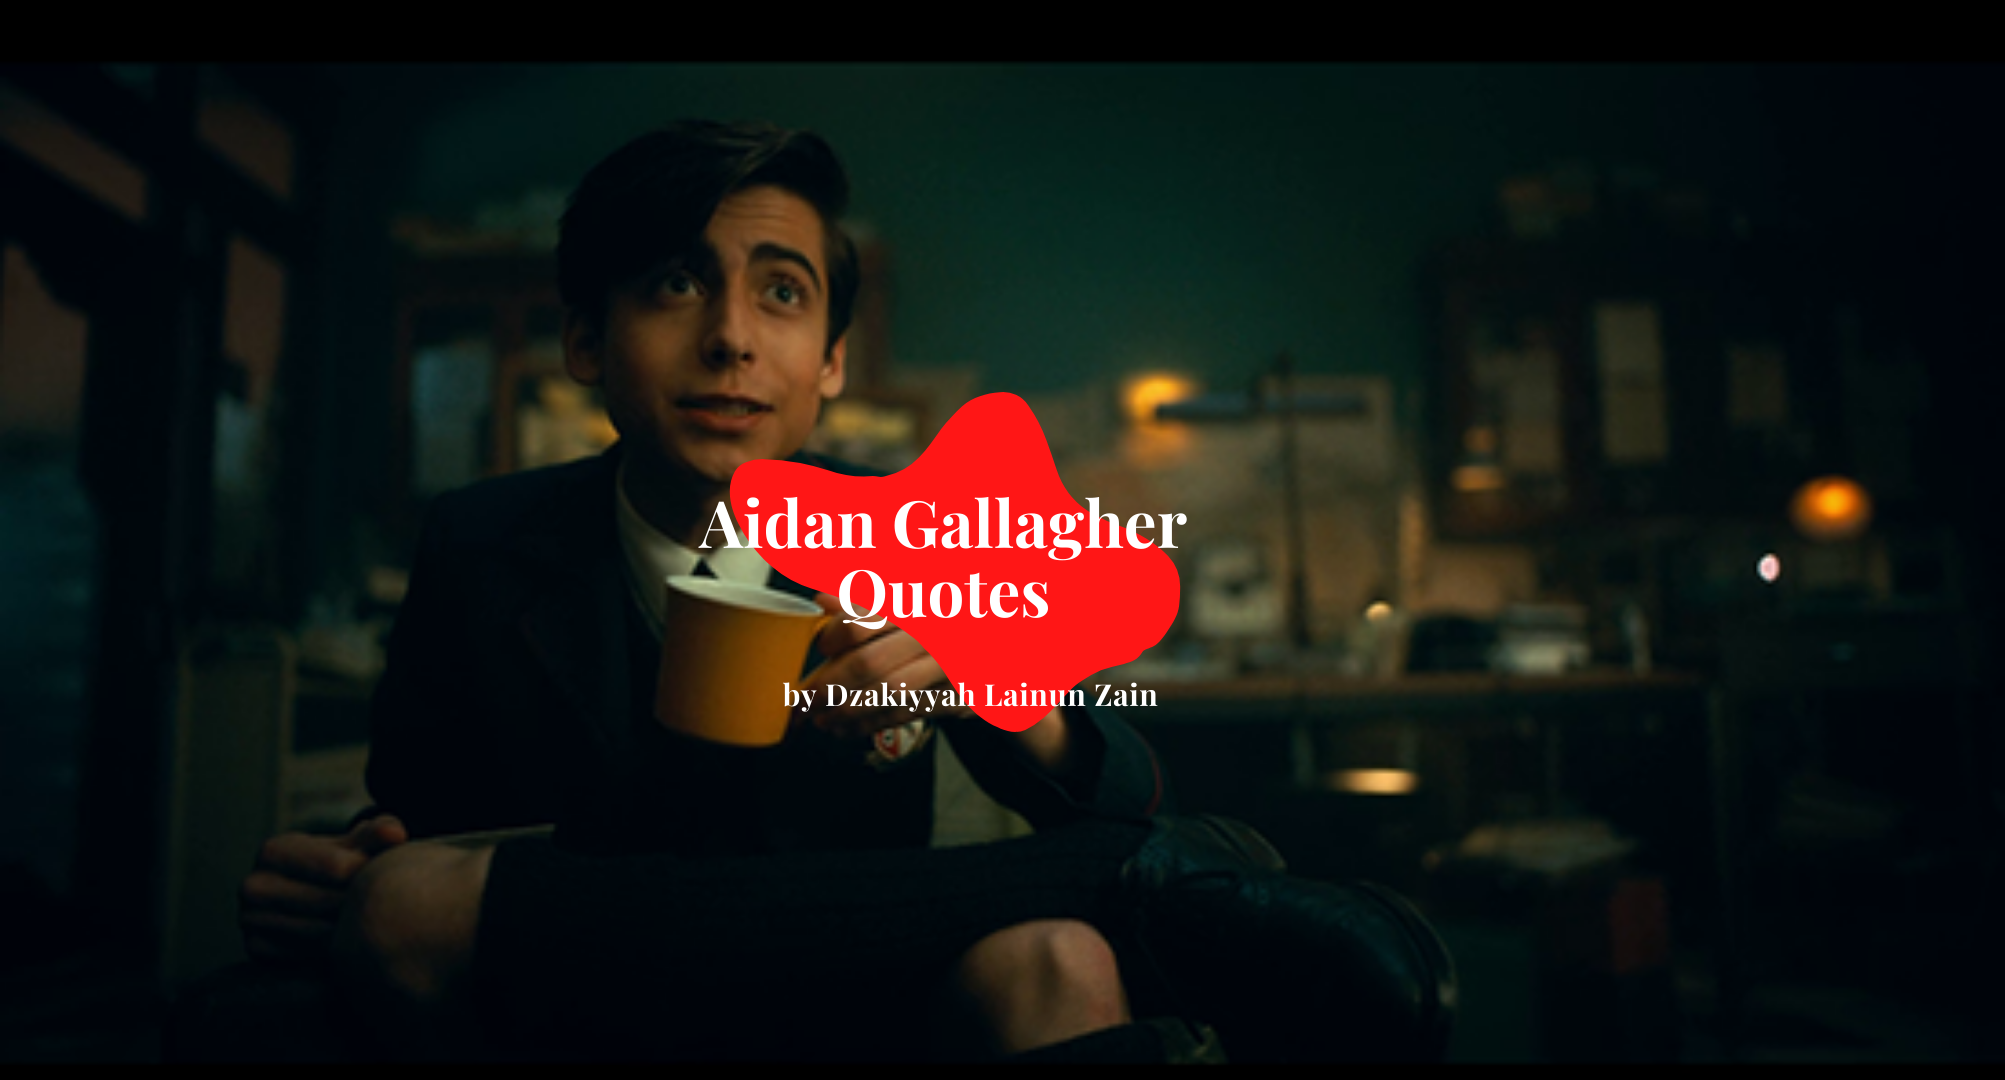 Aidan Gallagher Quotes